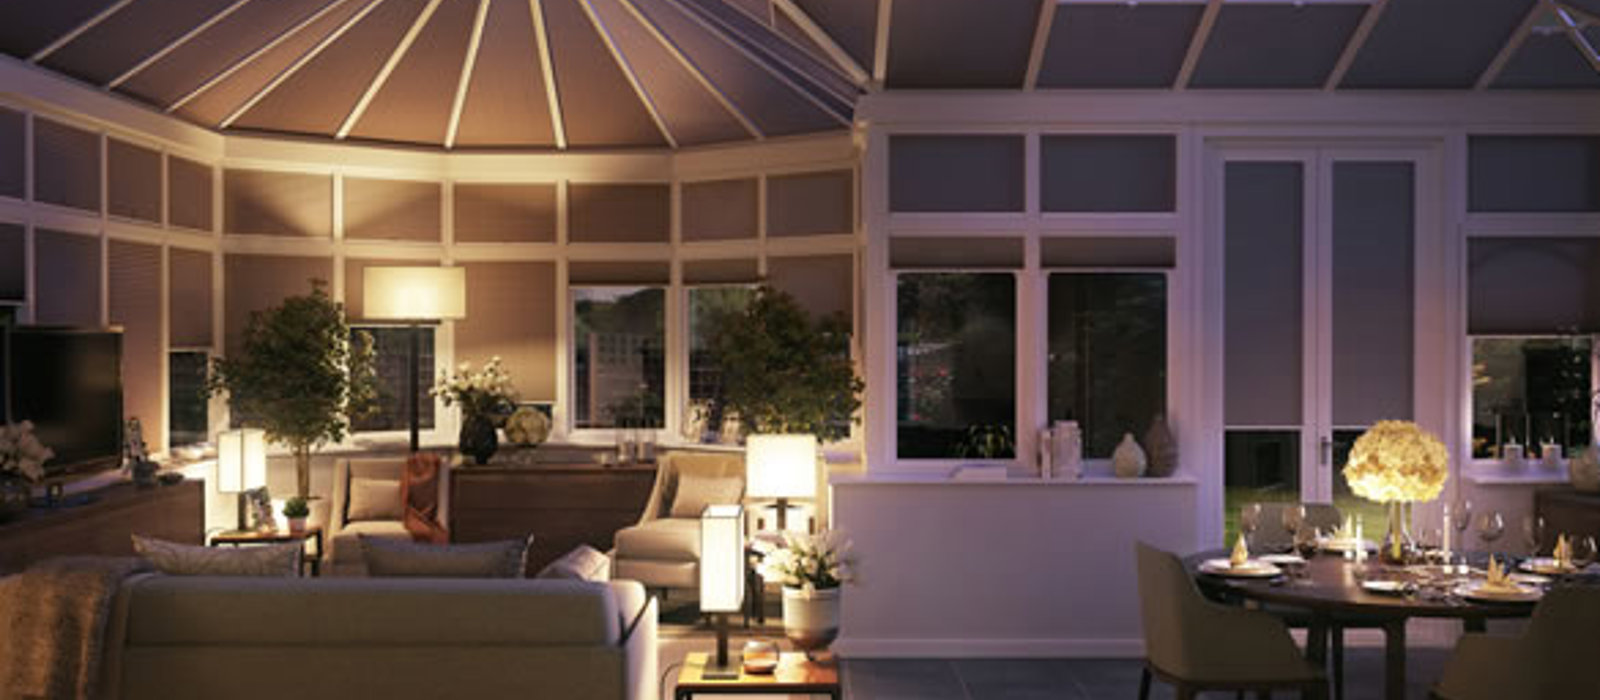 Large conservatory with Duette roof blinds for heat reduction